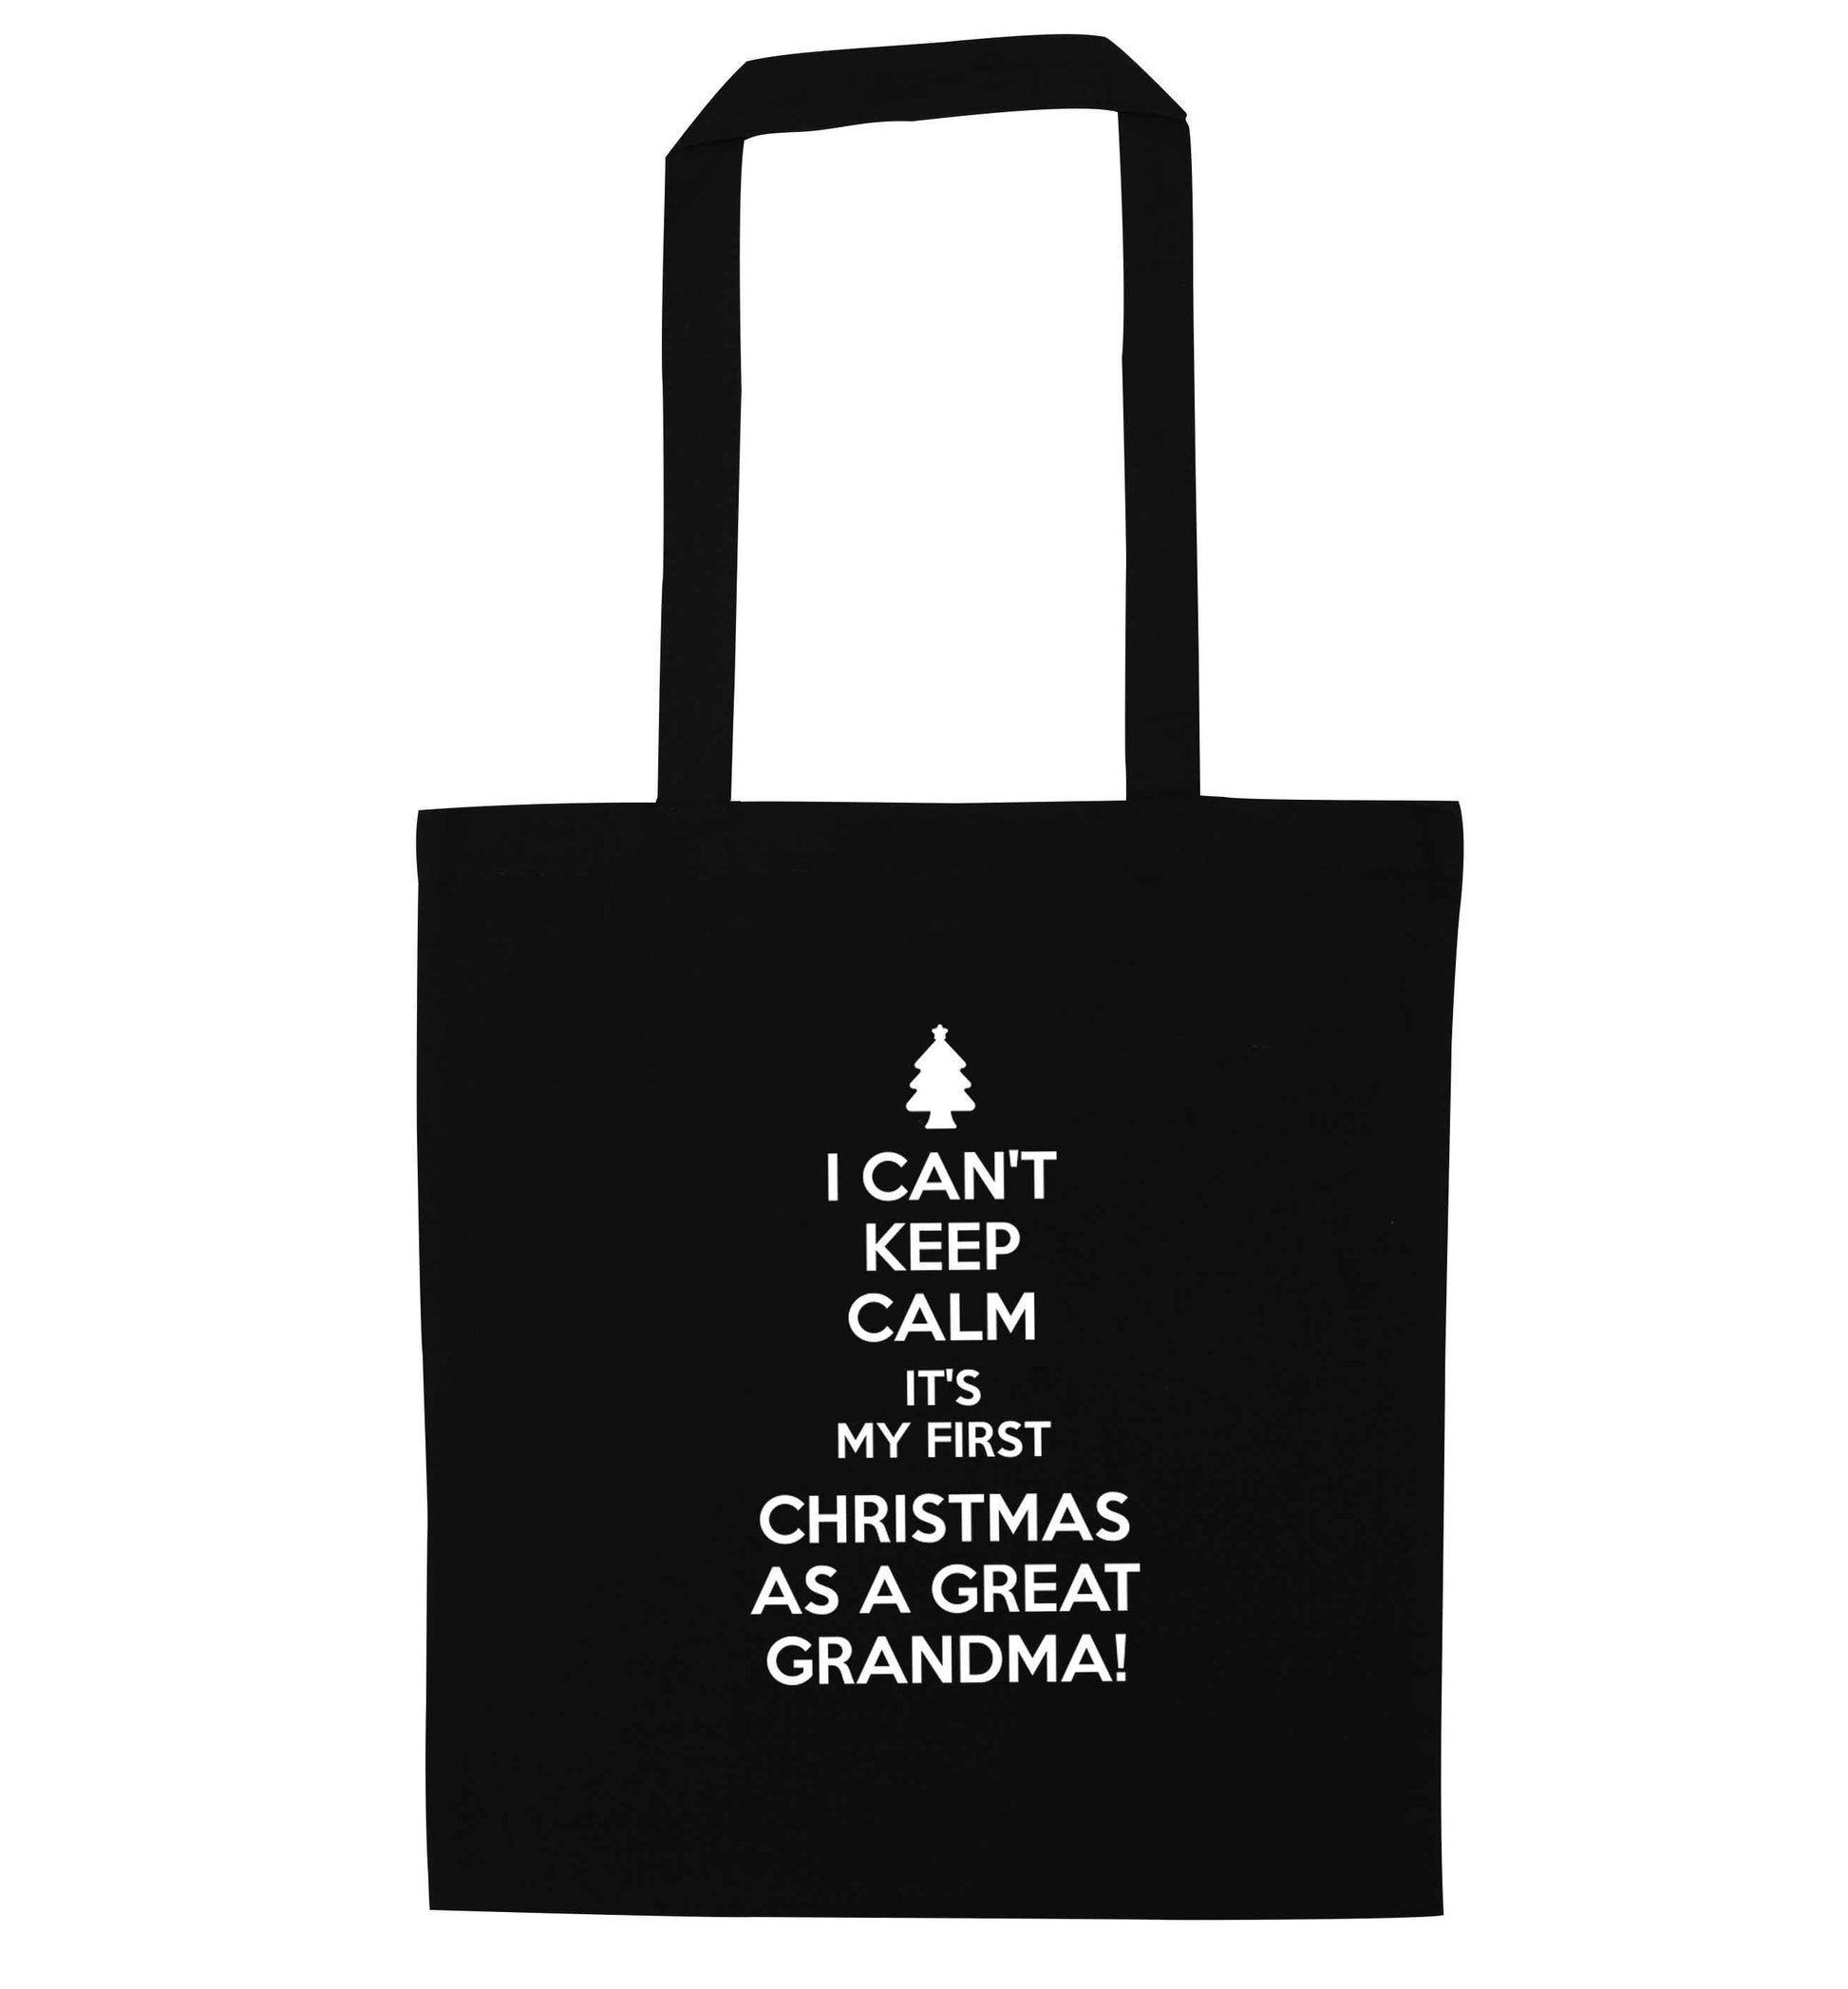 I can't keep calm it's my first Christmas as a great grandma! black tote bag